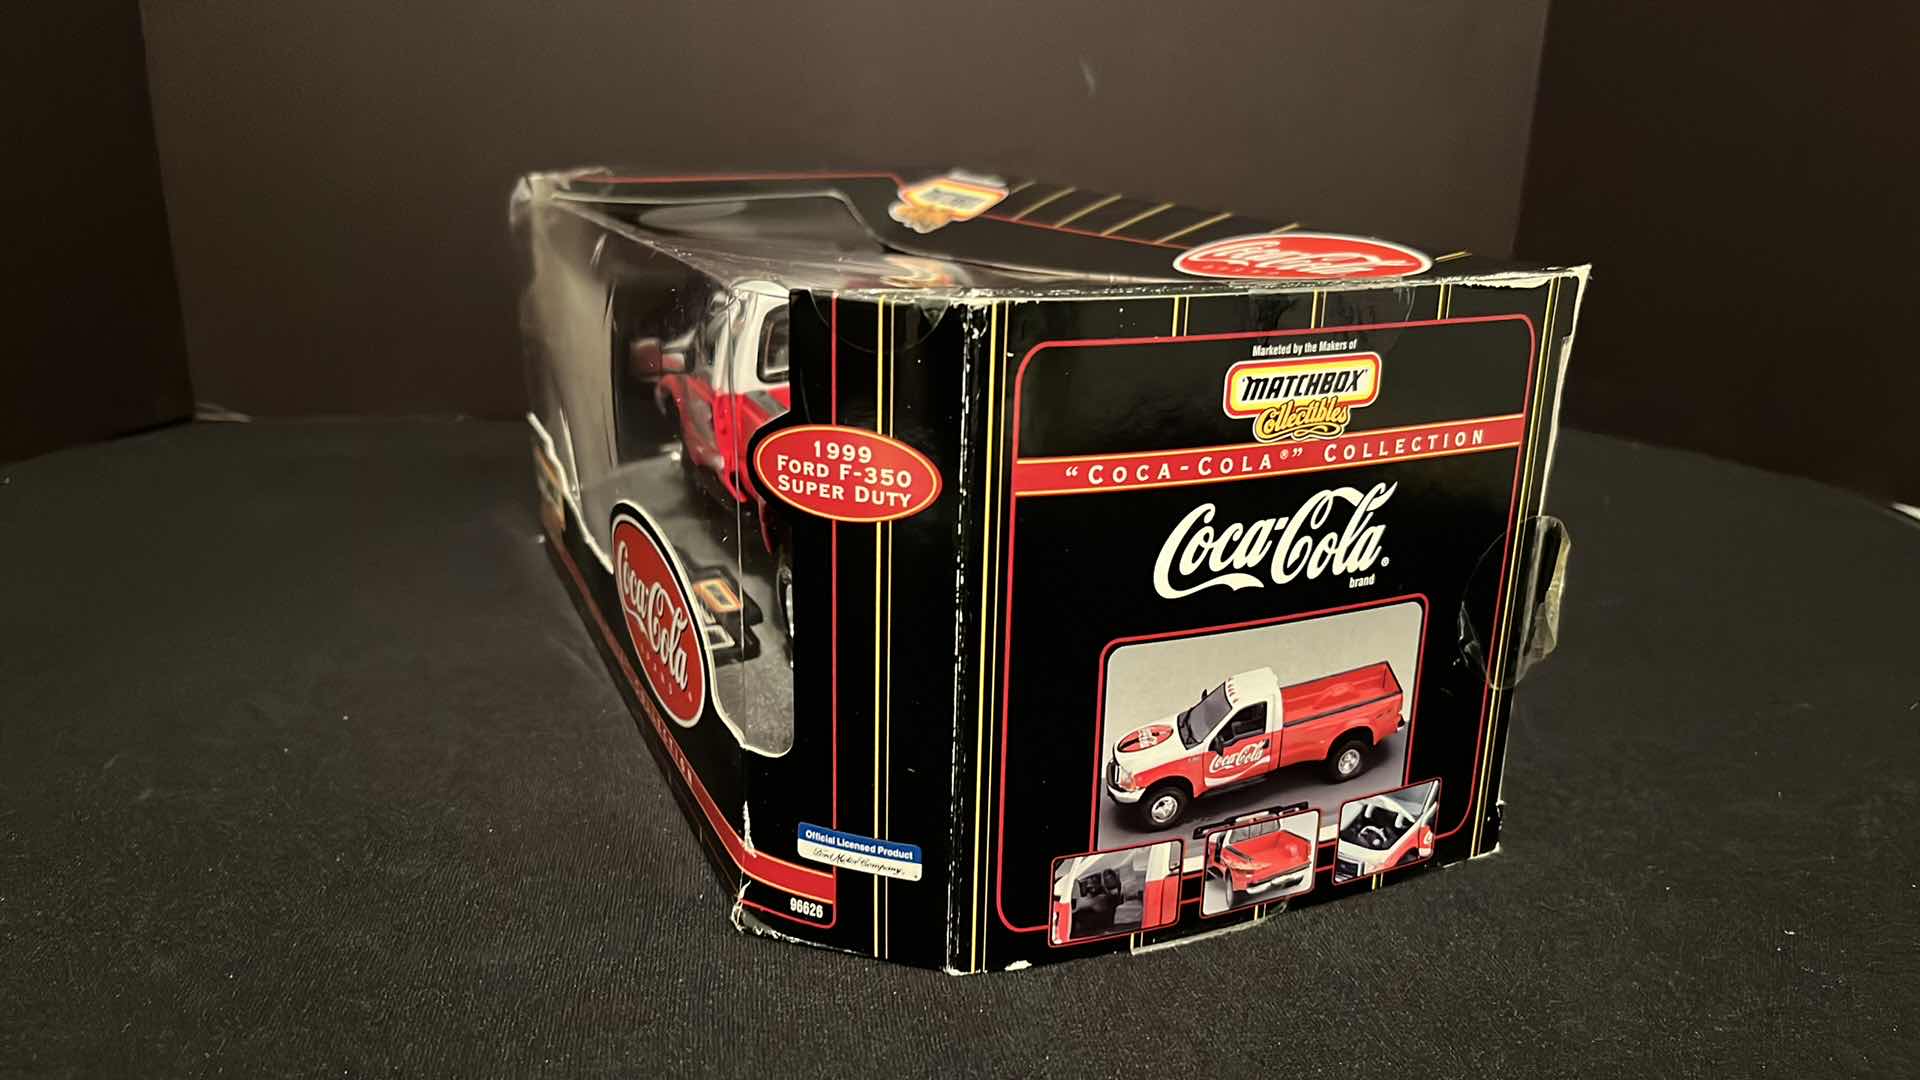 Photo 4 of MATCHBOX COLLECTIBLES COCA-COLA COLLECTION DIE-CAST METAL 1999 GORD F-350 SUPER DUTY PICK UP TRUCK, 1999